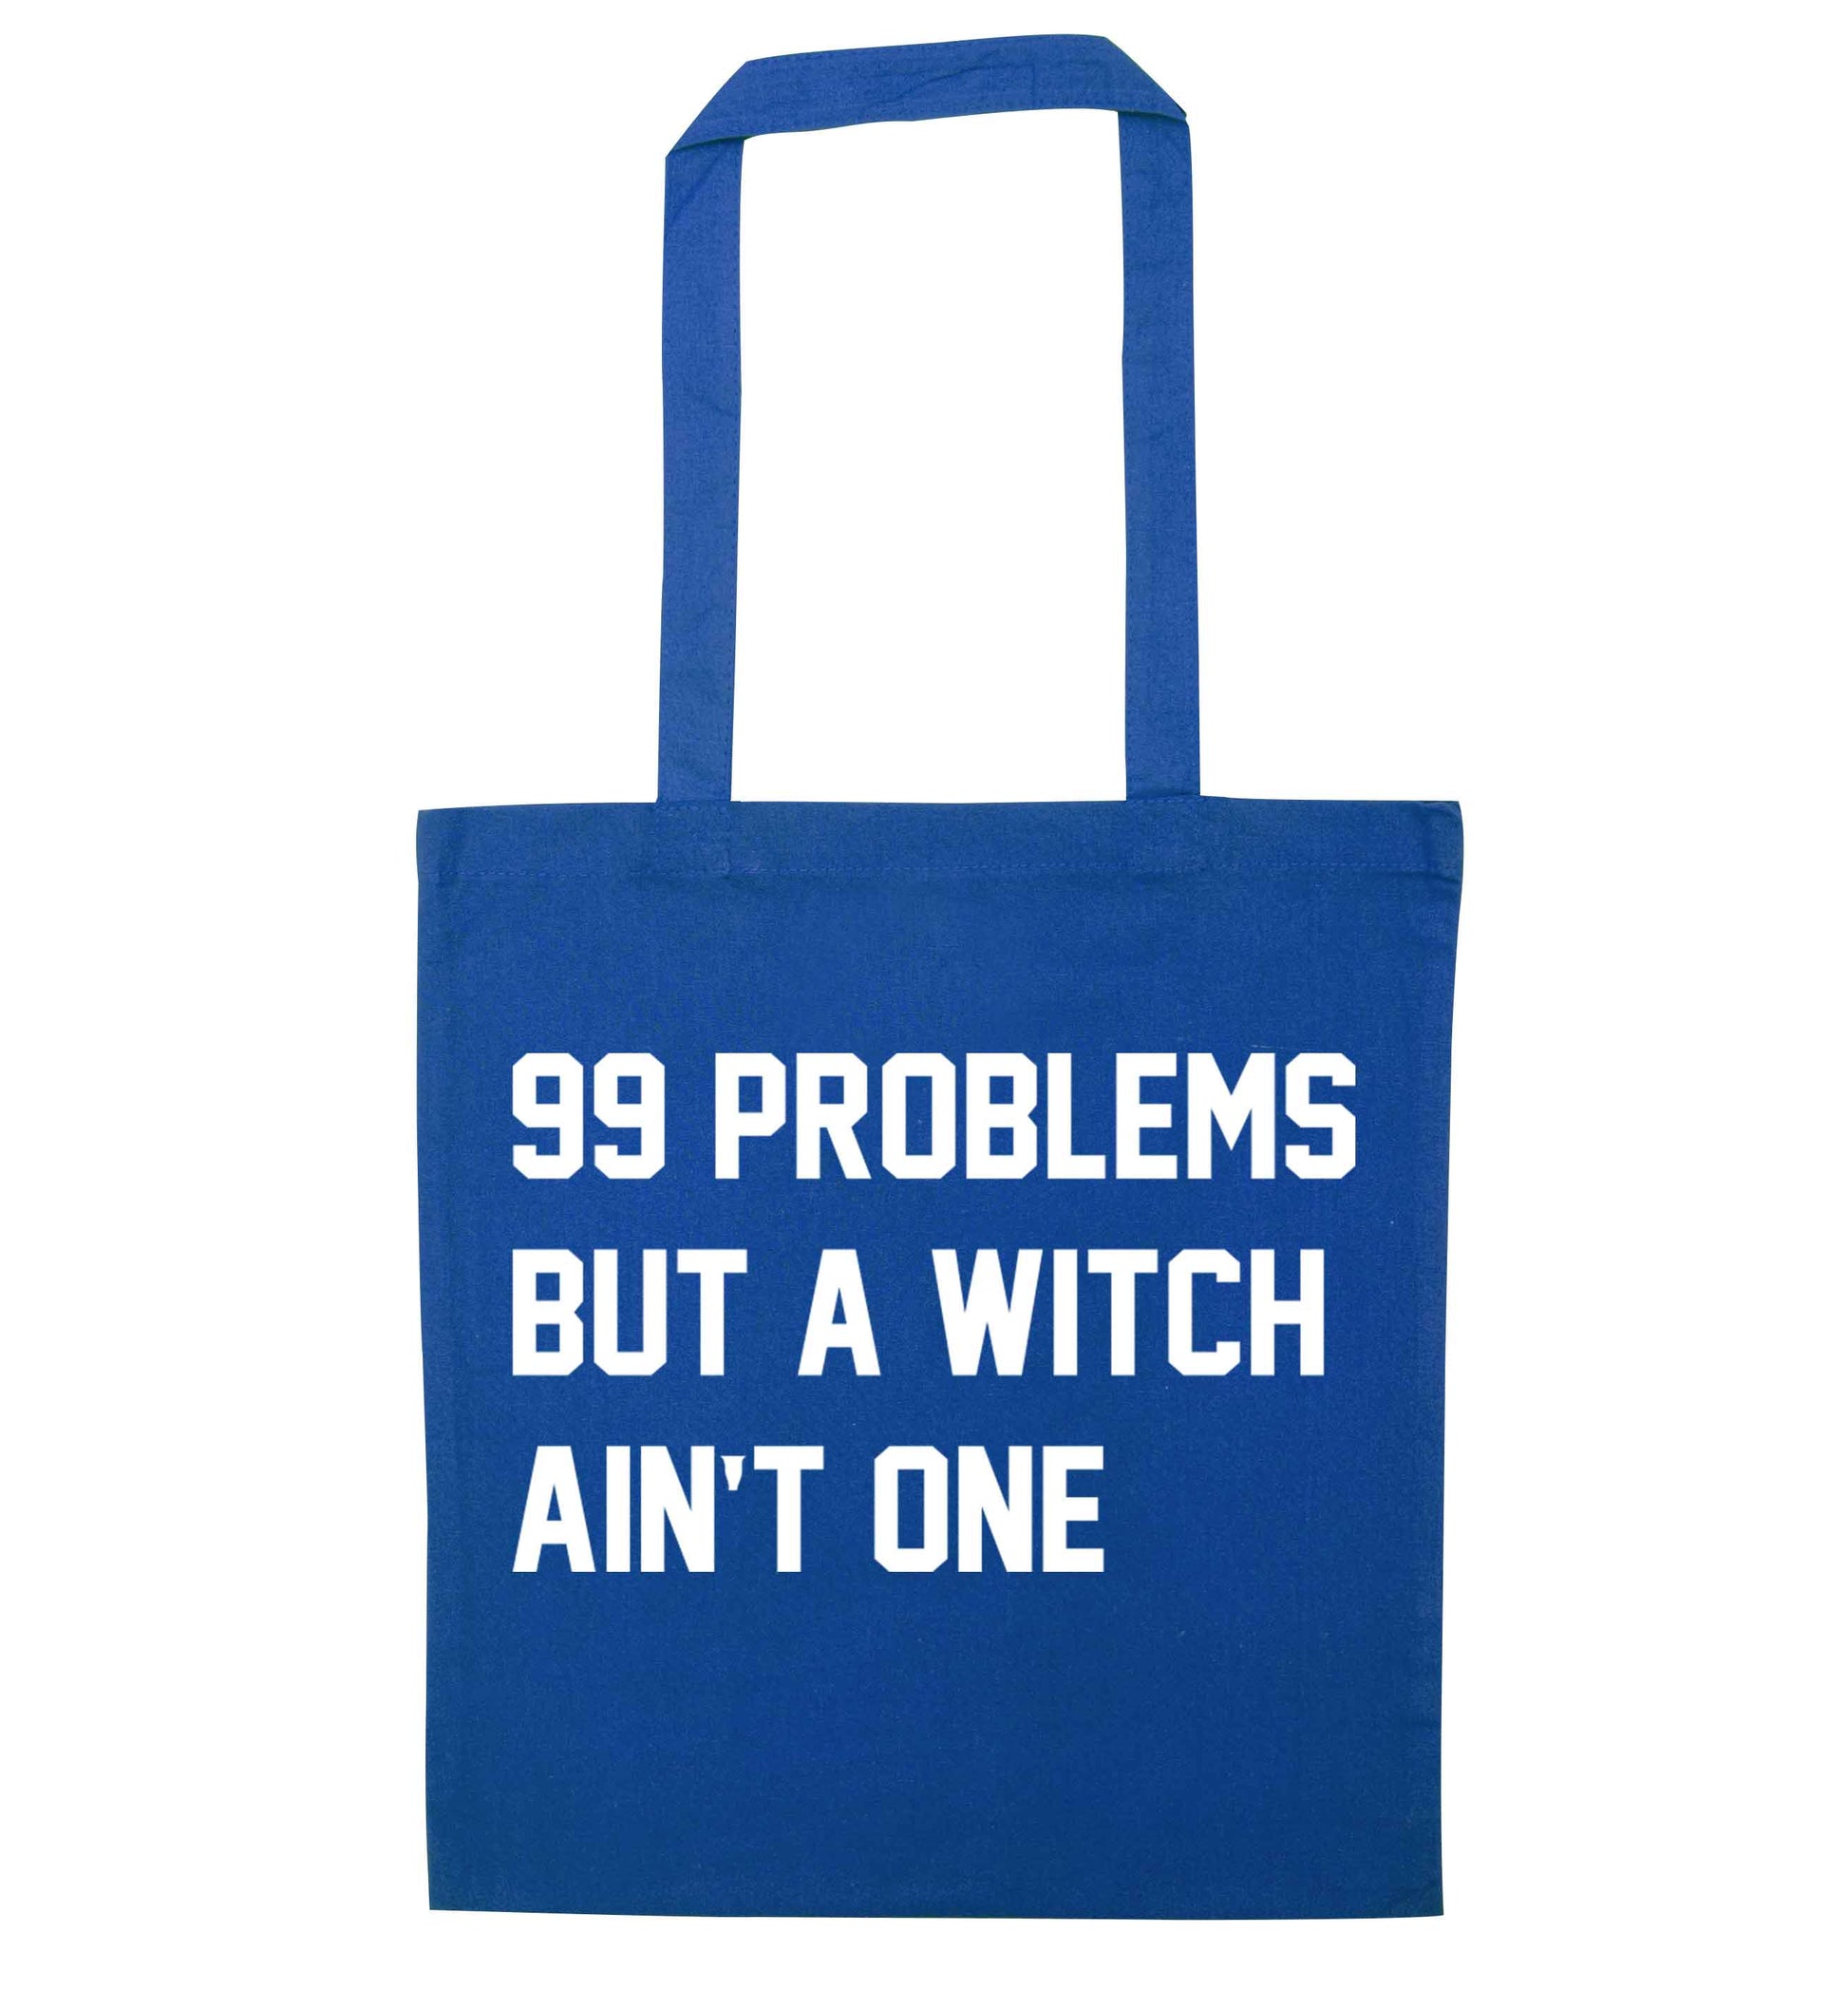 99 Problems but a witch aint one blue tote bag